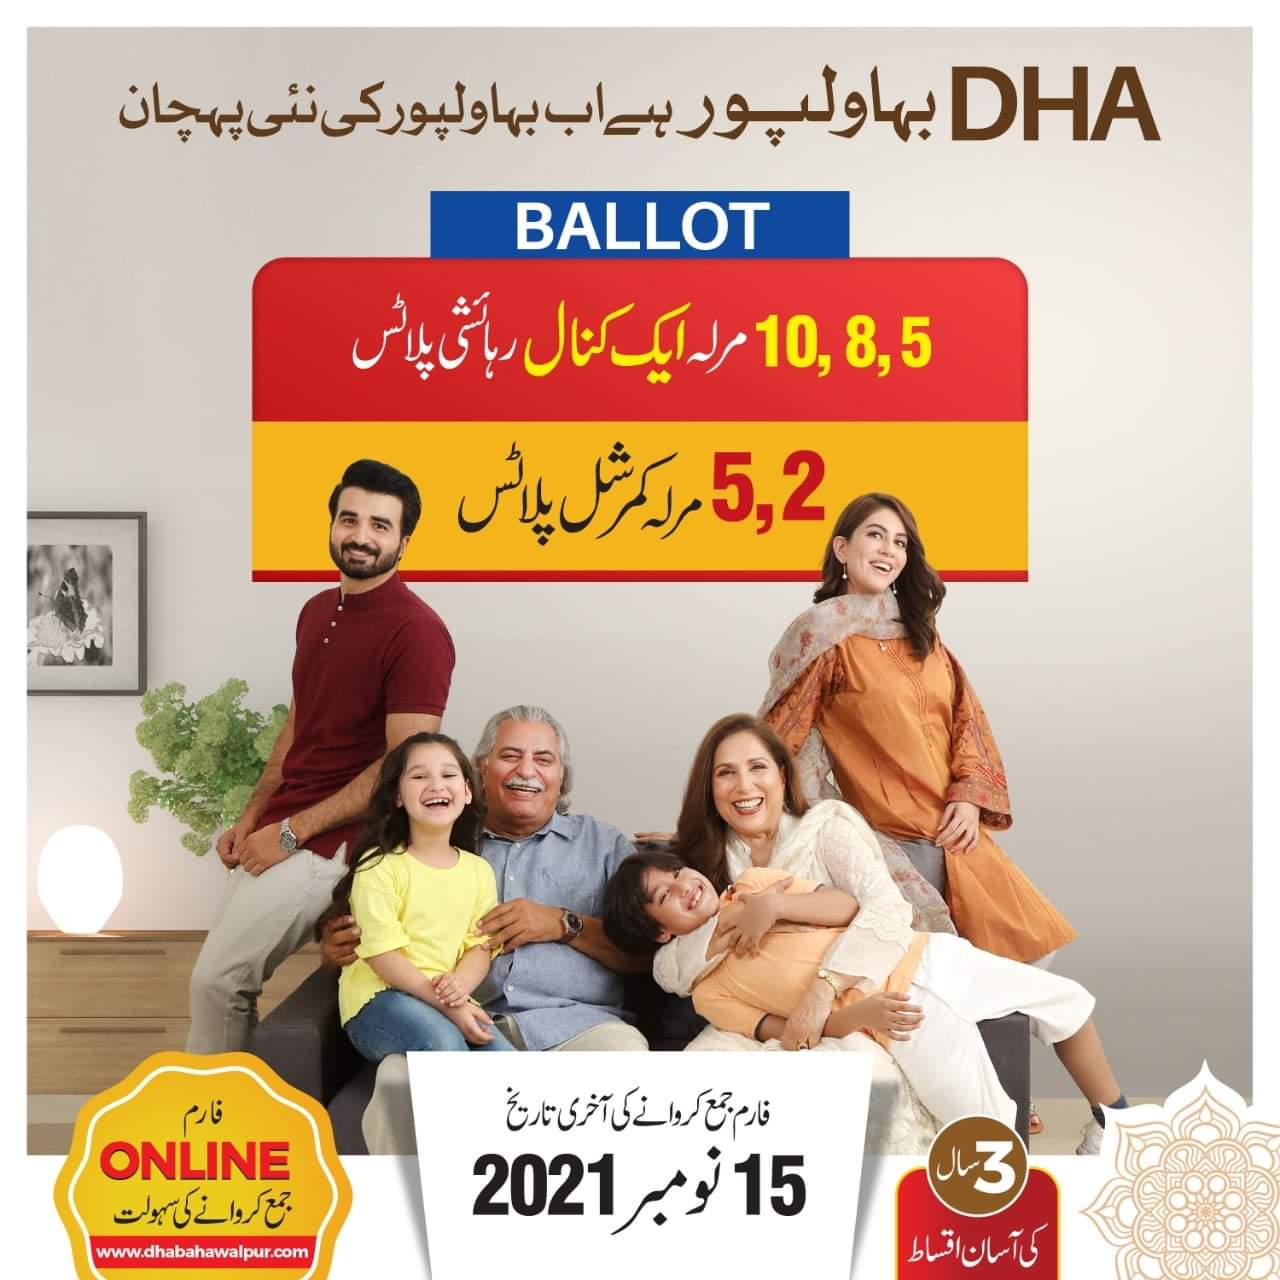 DHA Bahawalpur Ballot was started with effect from 17th October, 2021. It will remain open till 15th November, 2021.